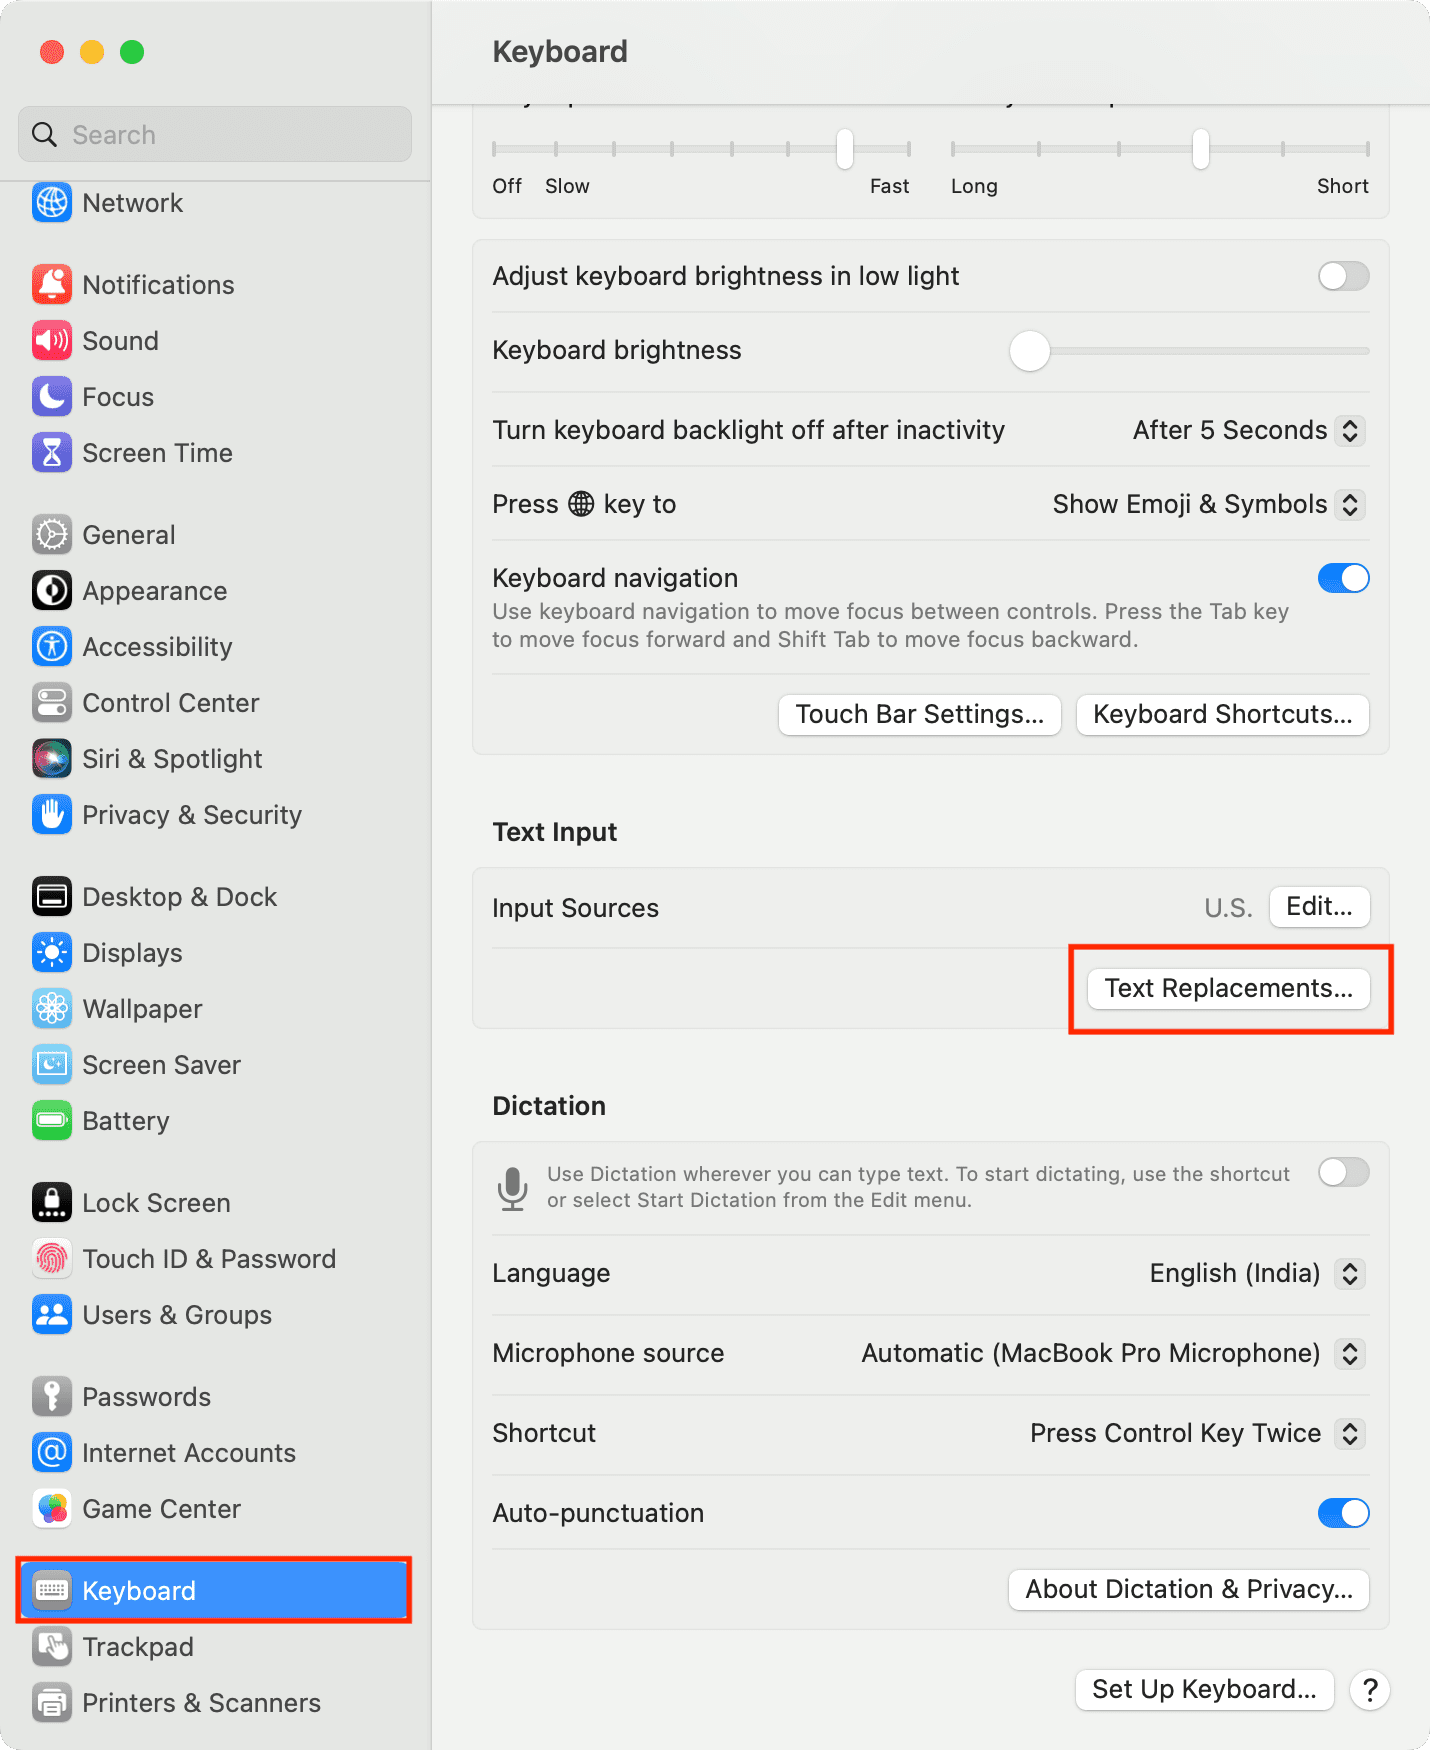 Text Replacements in Mac keyboard settings